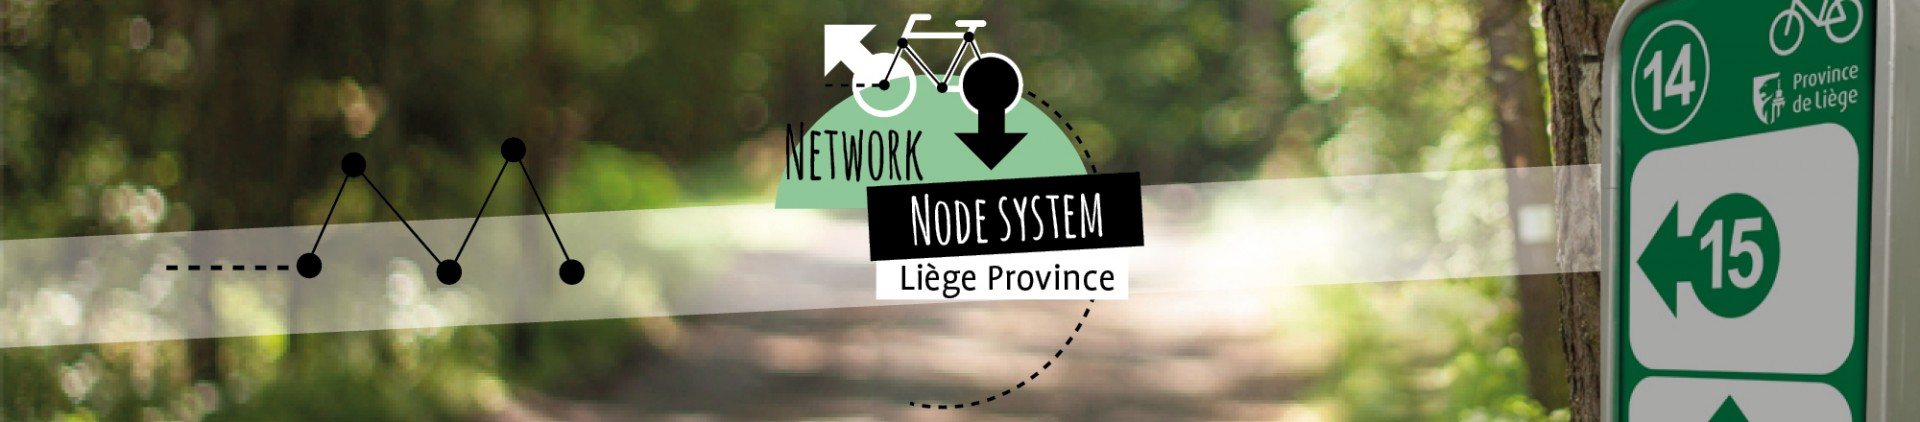 Node-system cycle tourism in the province of Liège